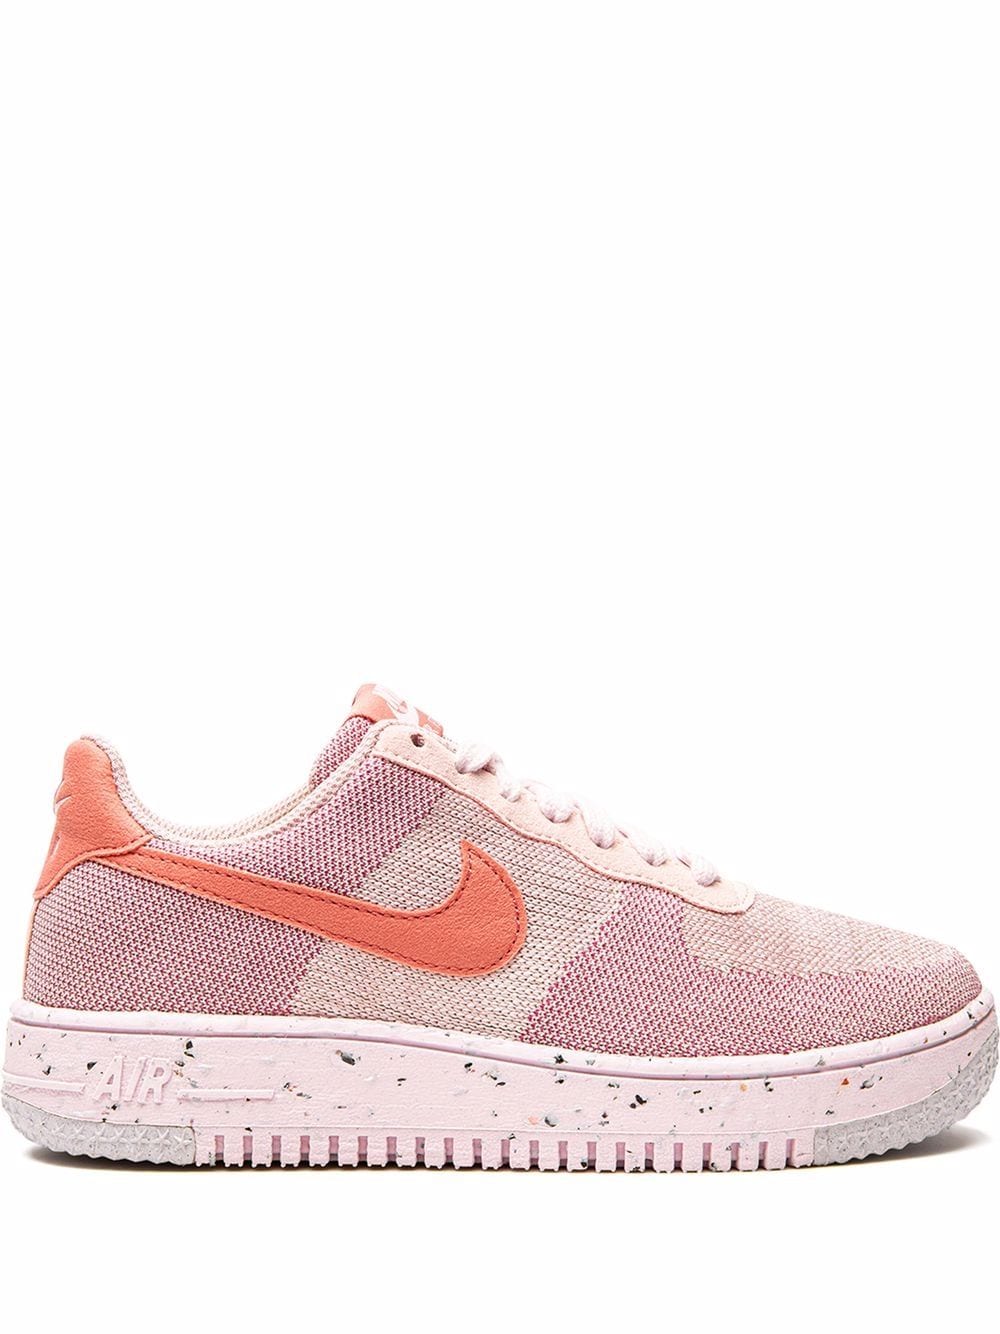 Nike Air Force 1 Low Crater Flyknit "Pink Glaze" sneakers von Nike